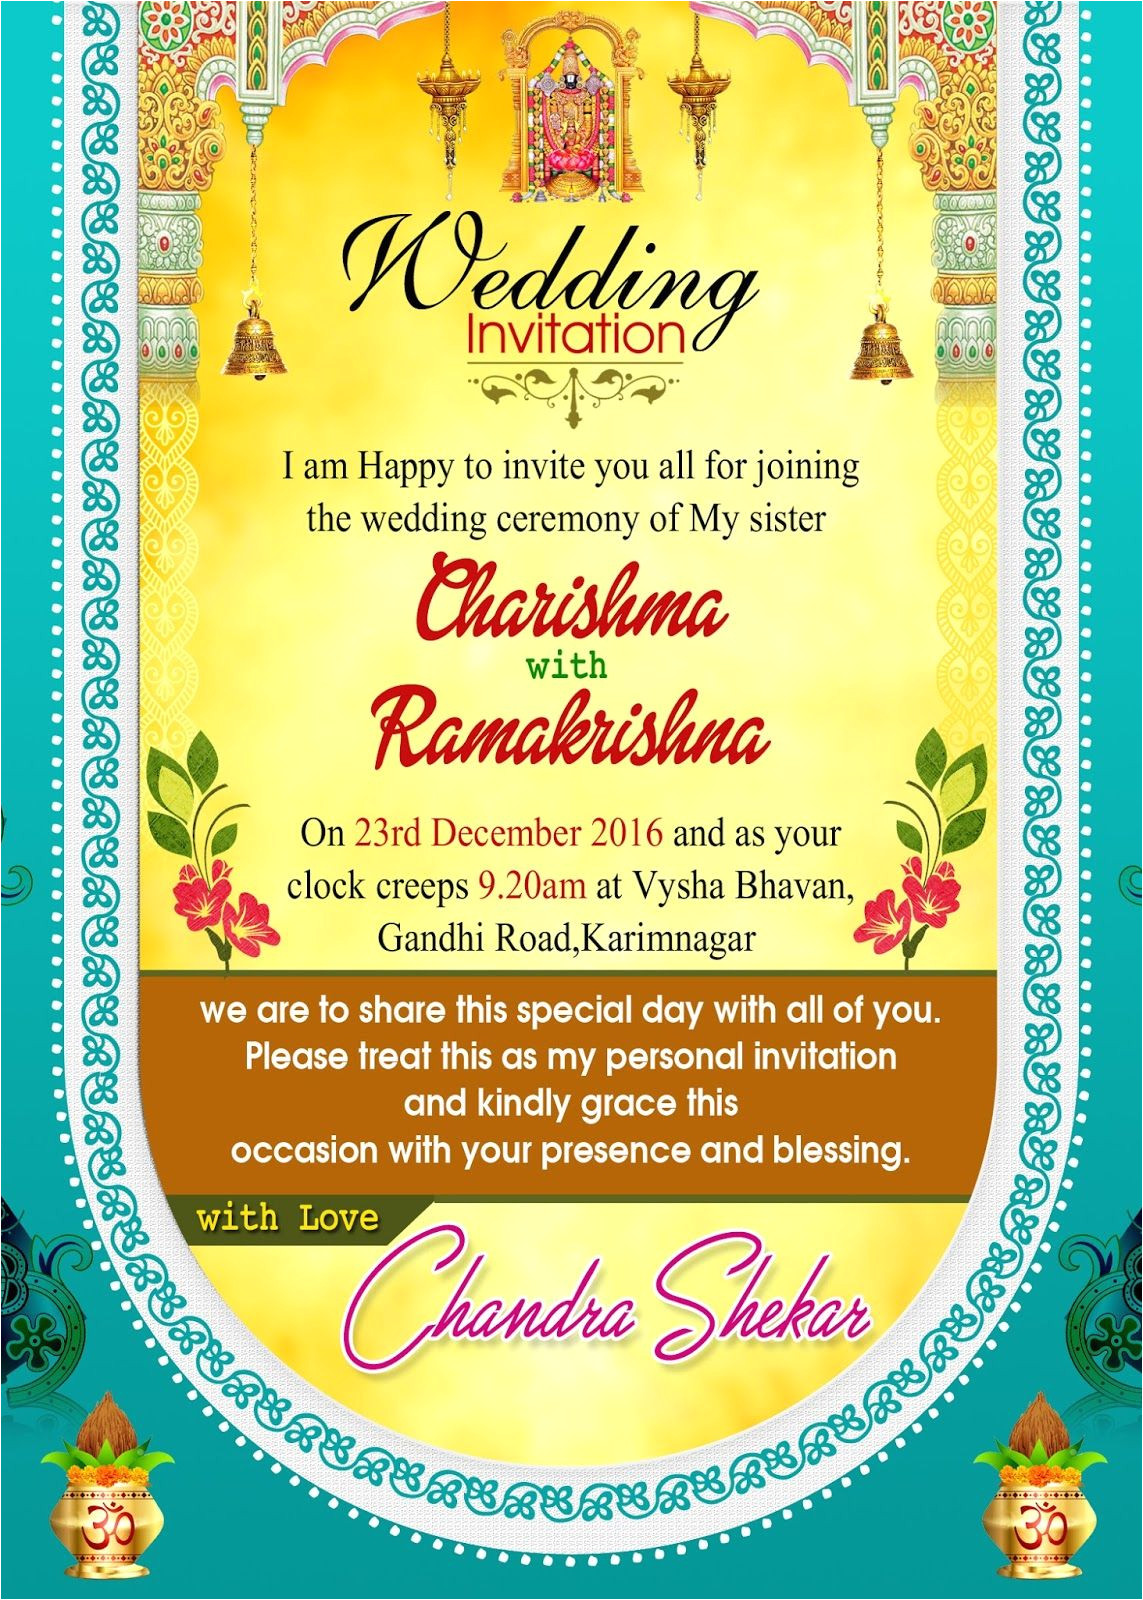 Indian Wedding Card Invitation Template Indian Wedding Invitation Wordings Psd Template Free for